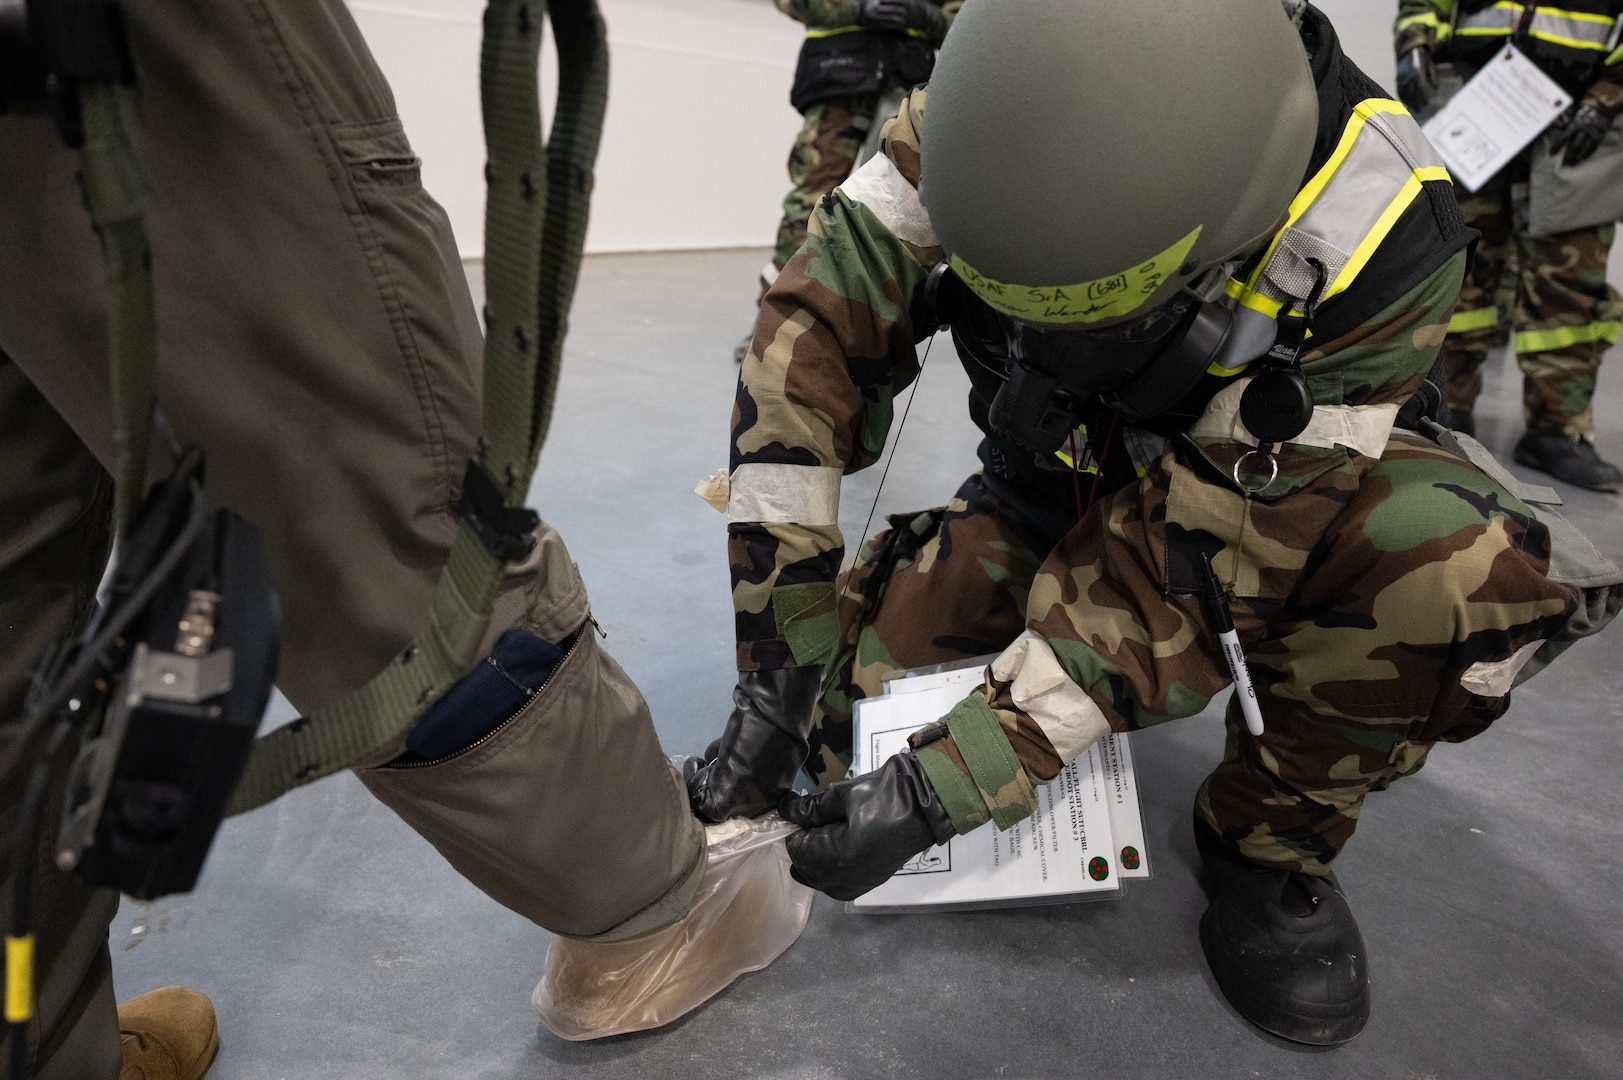 Airmen from the 155th Air Refueling Wing perform a simulated uniform decontamination of the specialized suit as part of the Mission-Oriented Protective Postures gear during a large-scale readiness exercise Feb. 4, 2024, on National Guard airbase in Lincoln, Nebraska.